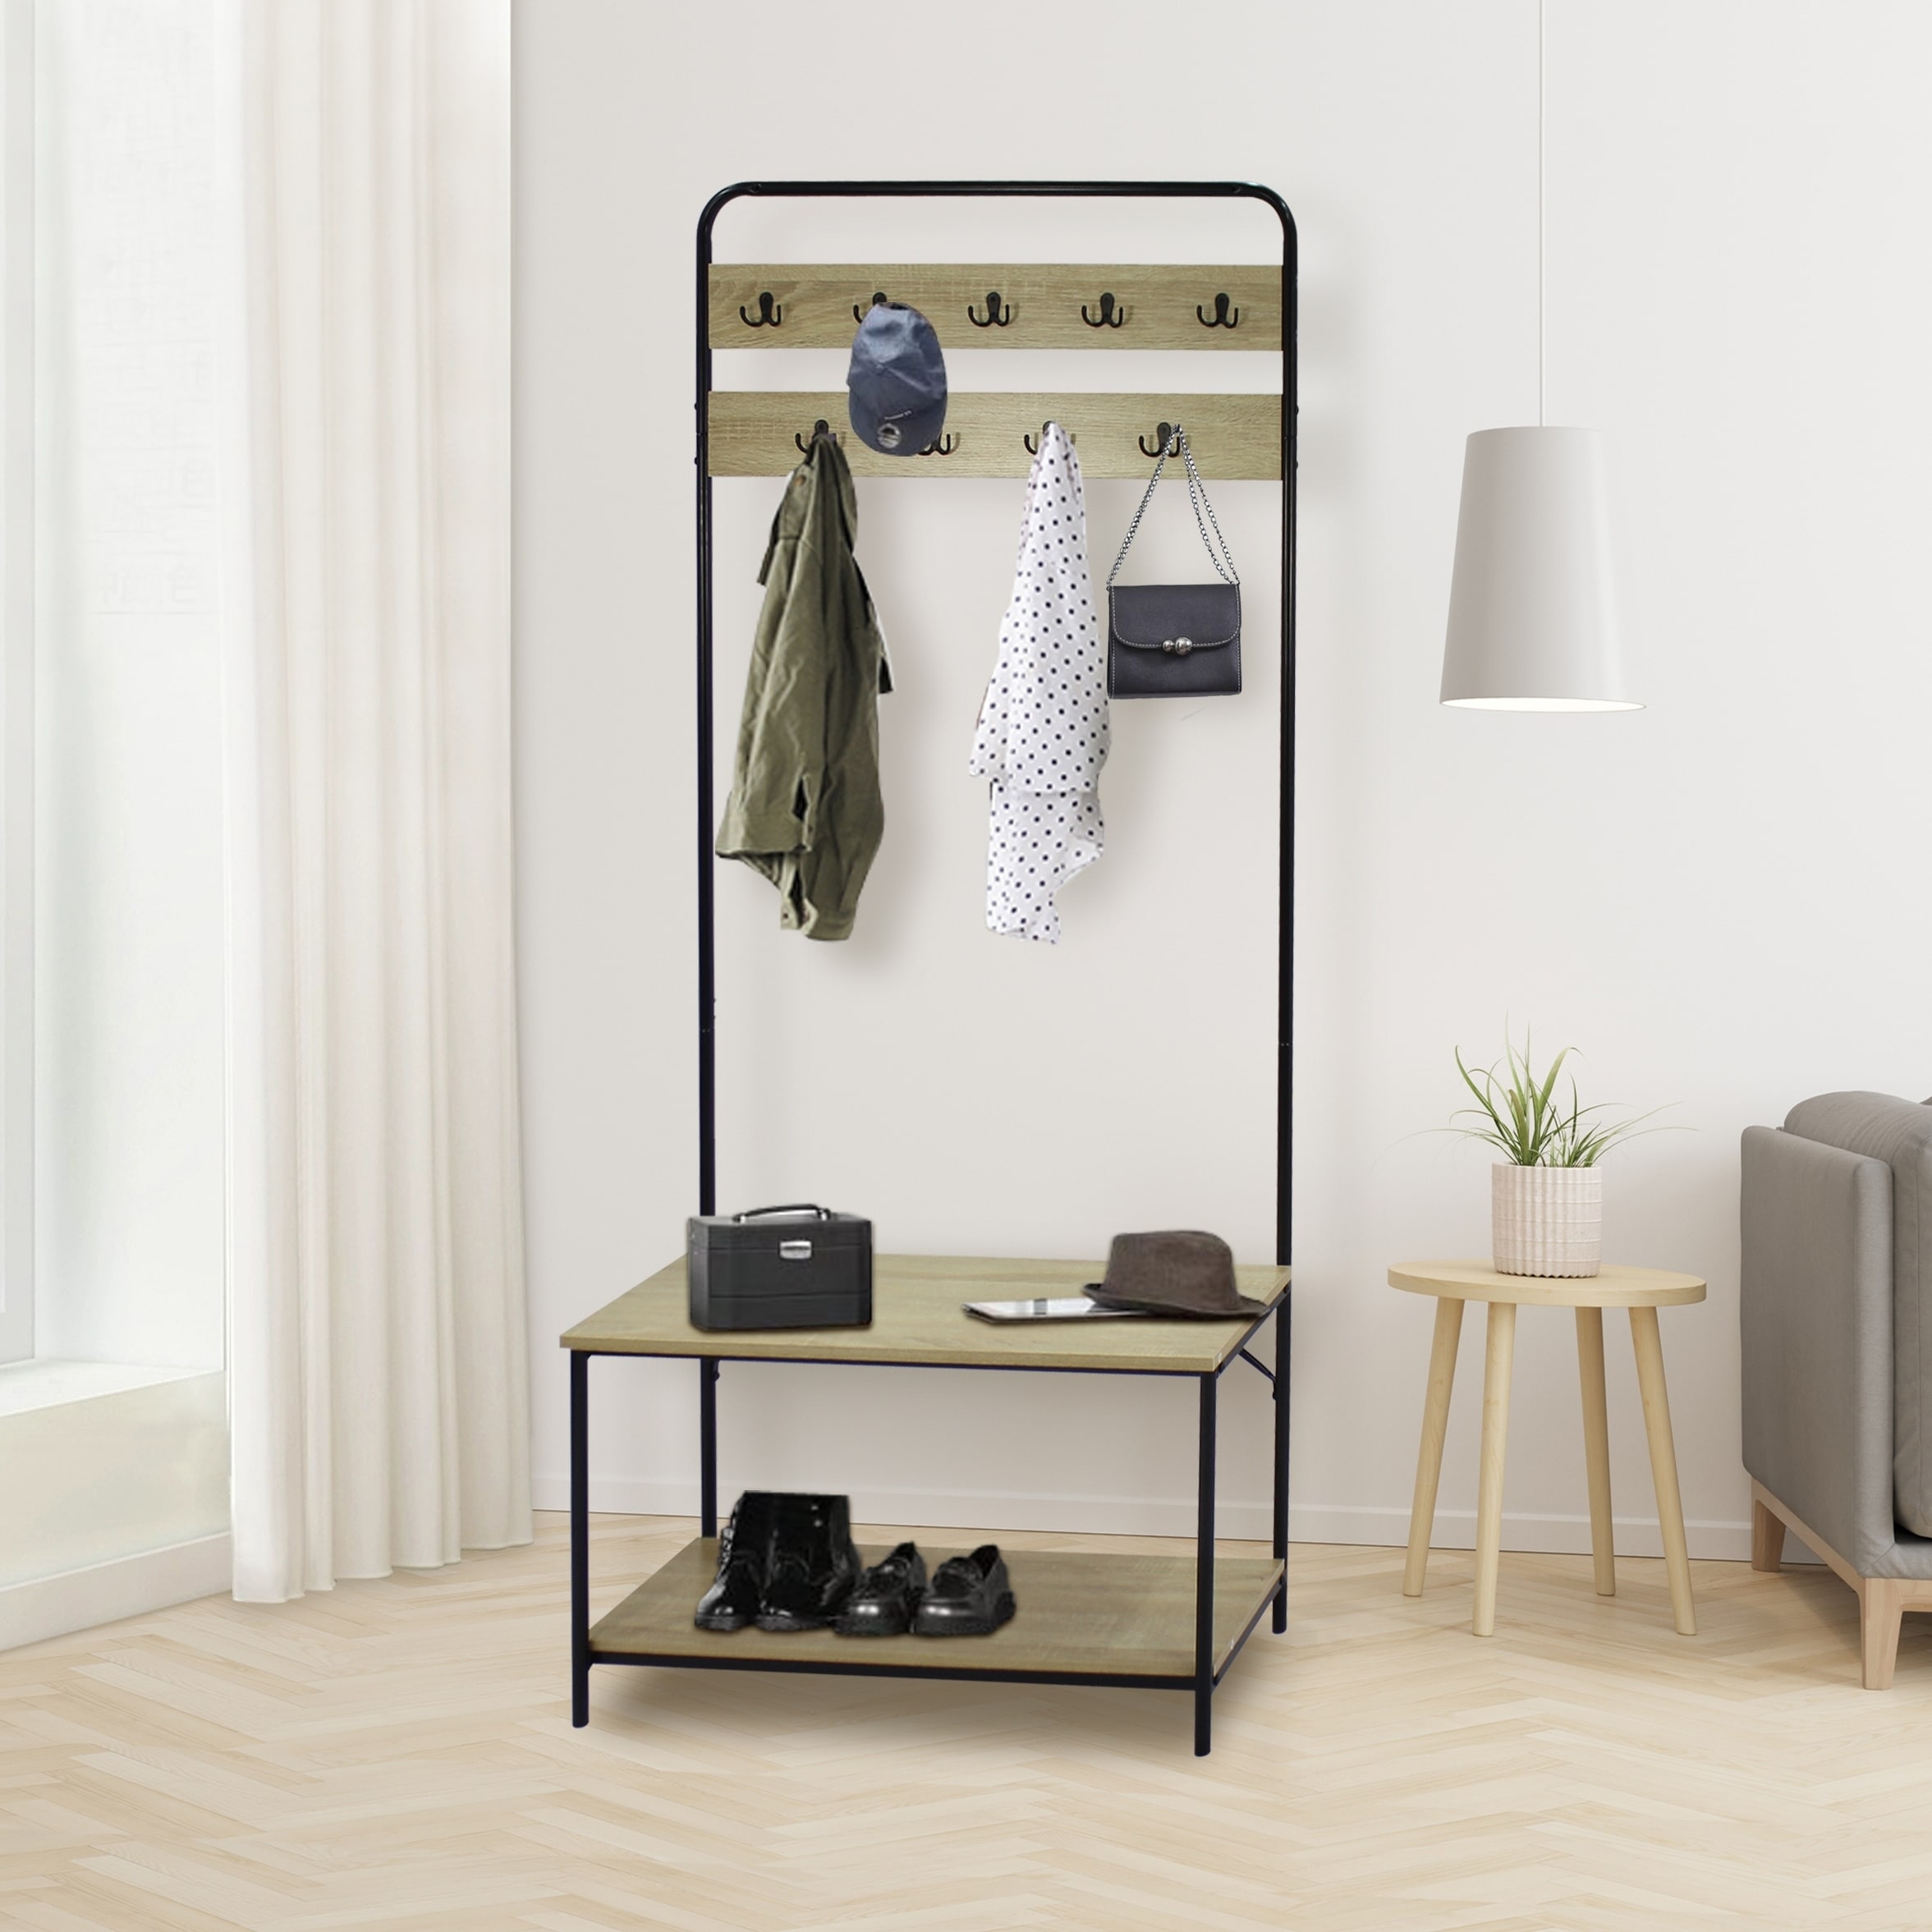 Shop Carbon Loft Mathieu Hall Tree With Shoe Storage Bench 32 X 12 X 67 Overstock 30537198,Painting An Accent Wall In Bathroom